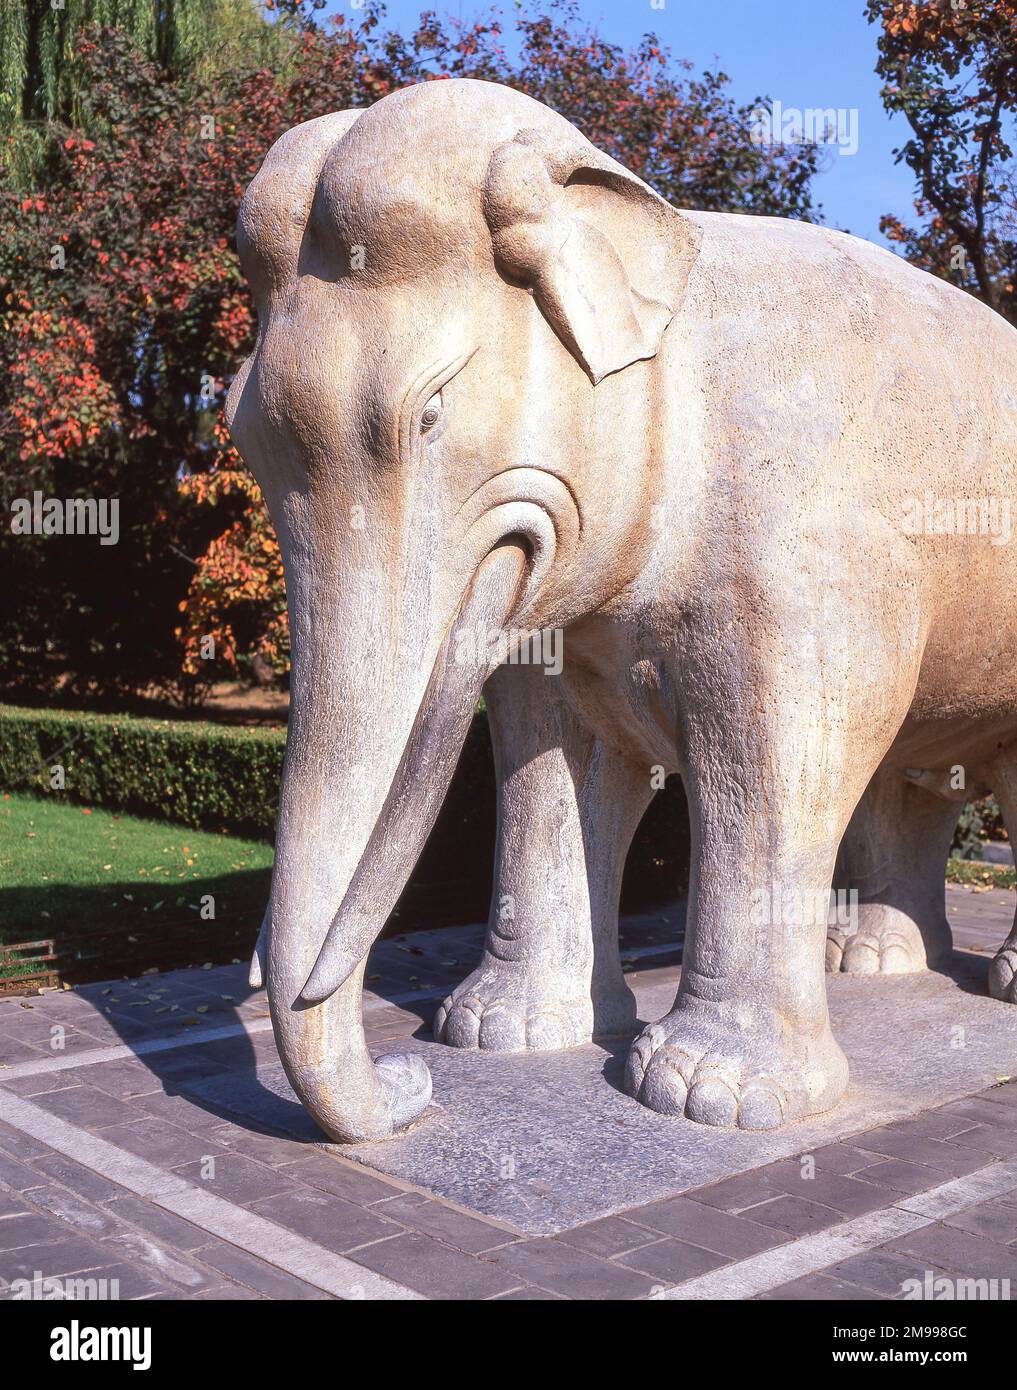 Mythical elephant ancient creature statue, Sacred Way, The Ming tombs, Changping District, Beijing, The People's Republic of China Stock Photo